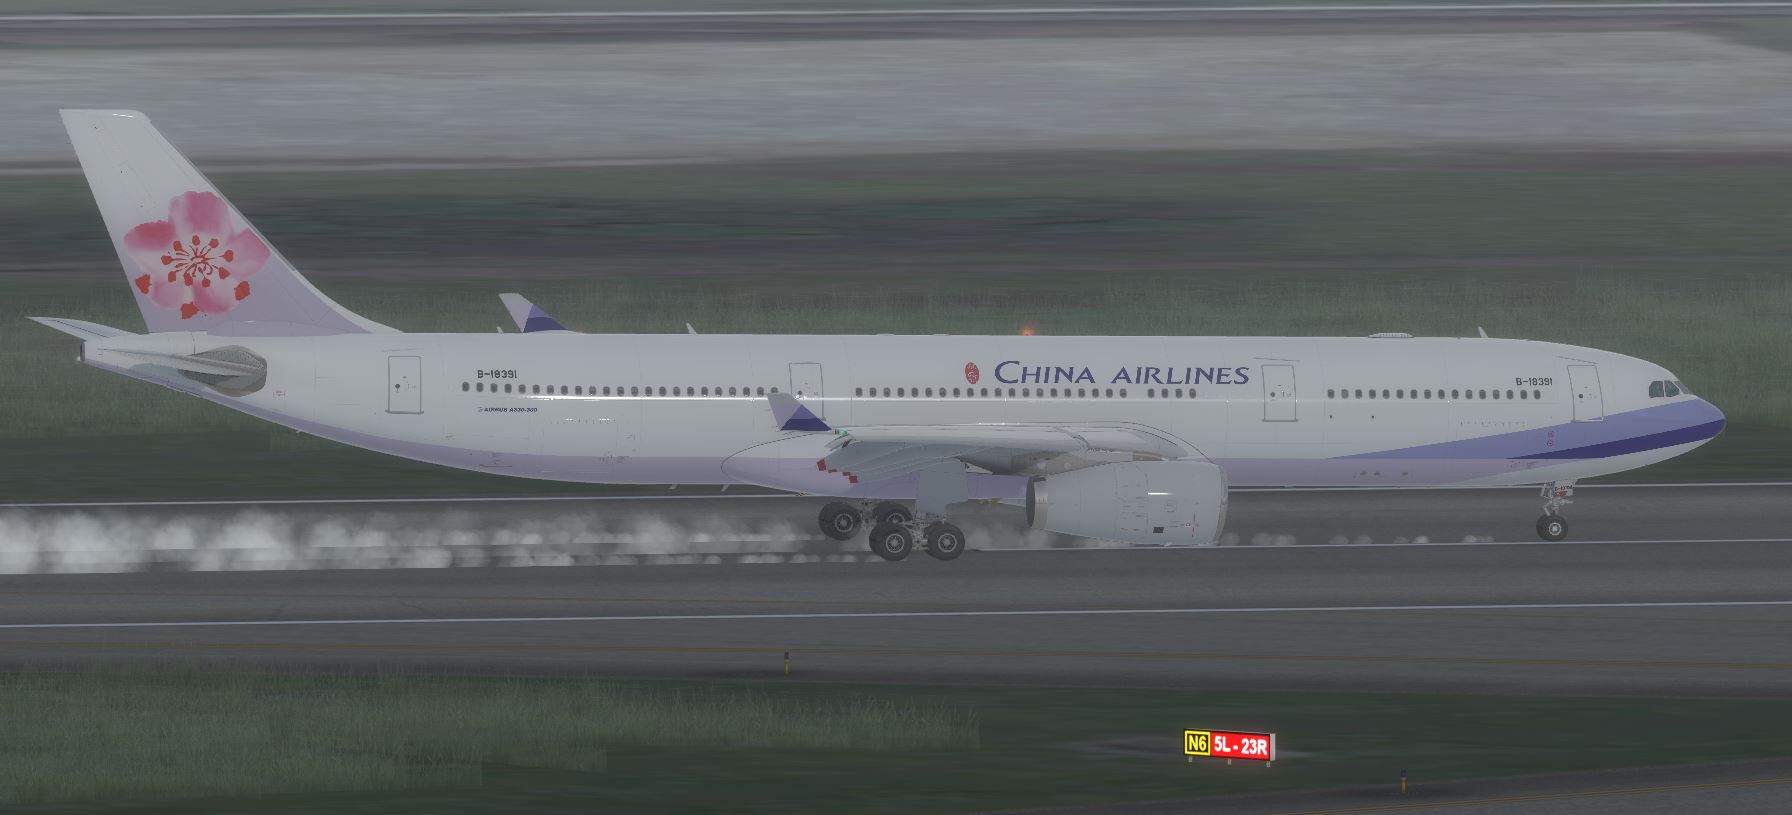 AS A330 ChinaAirline-2216 